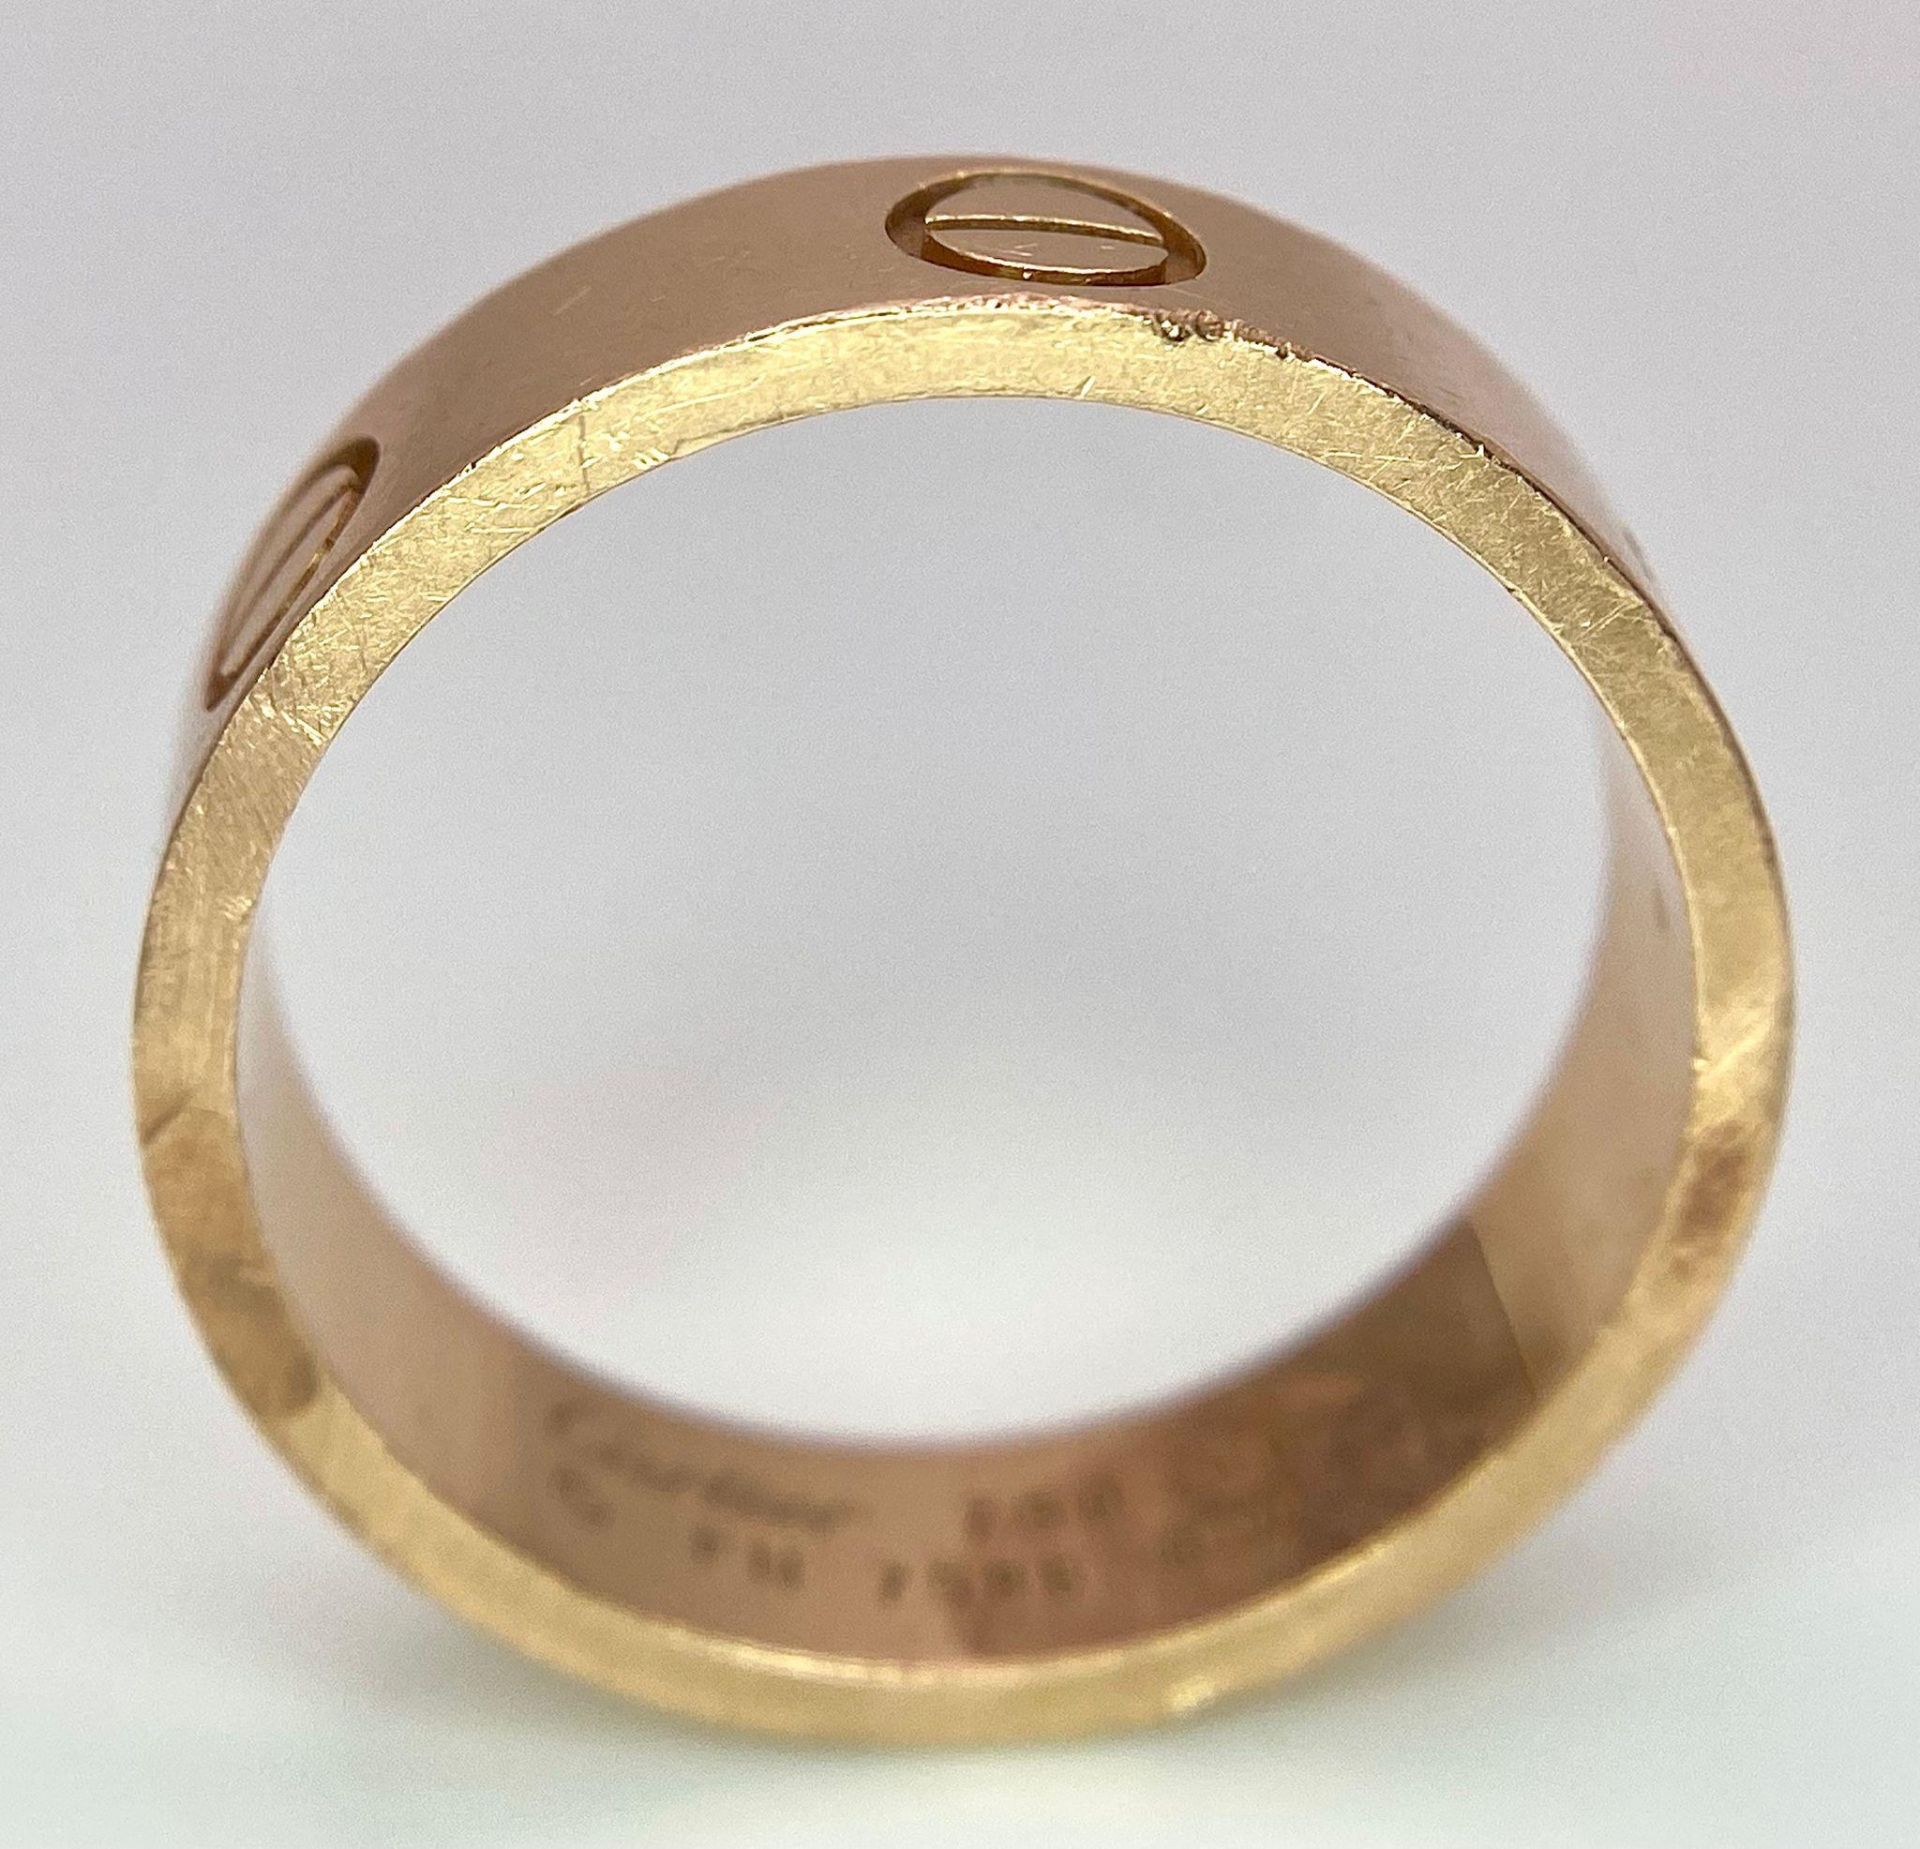 A Cartier 18K Rose Gold Love Band Gents Ring. 6mm width. Cartier hallmarks. Size W. 8.6g weight. - Image 6 of 9